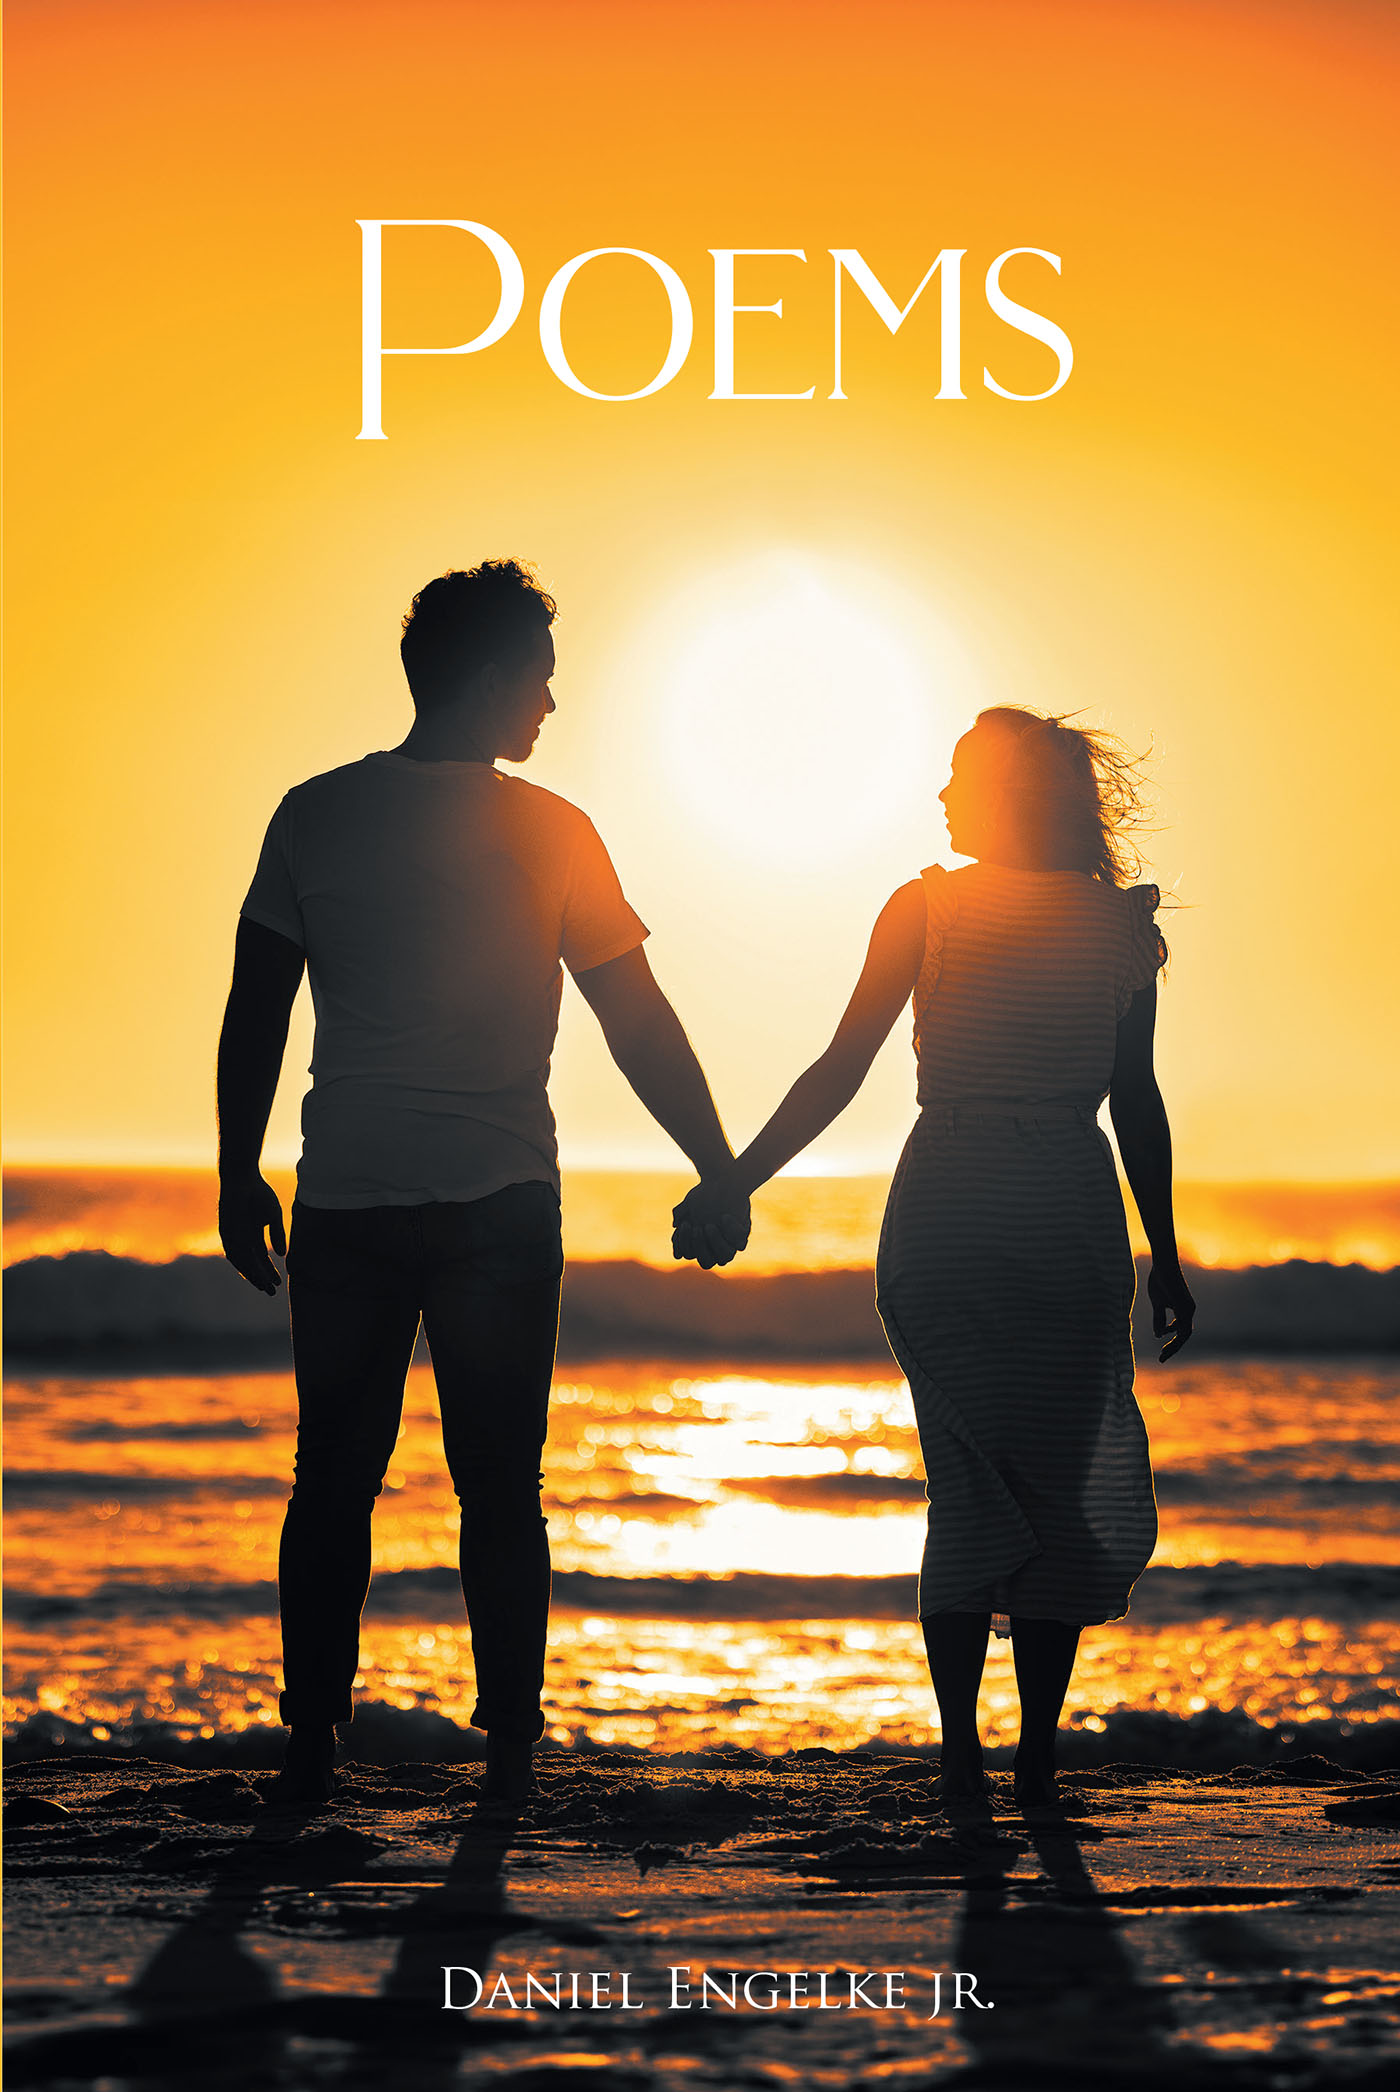 Daniel Engelke Jr.’s New Book, "Poems," is a Riveting Series of Poems That Documents the Lessons & Experiences from the Author’s Life That Have Shaped Him Over the Years